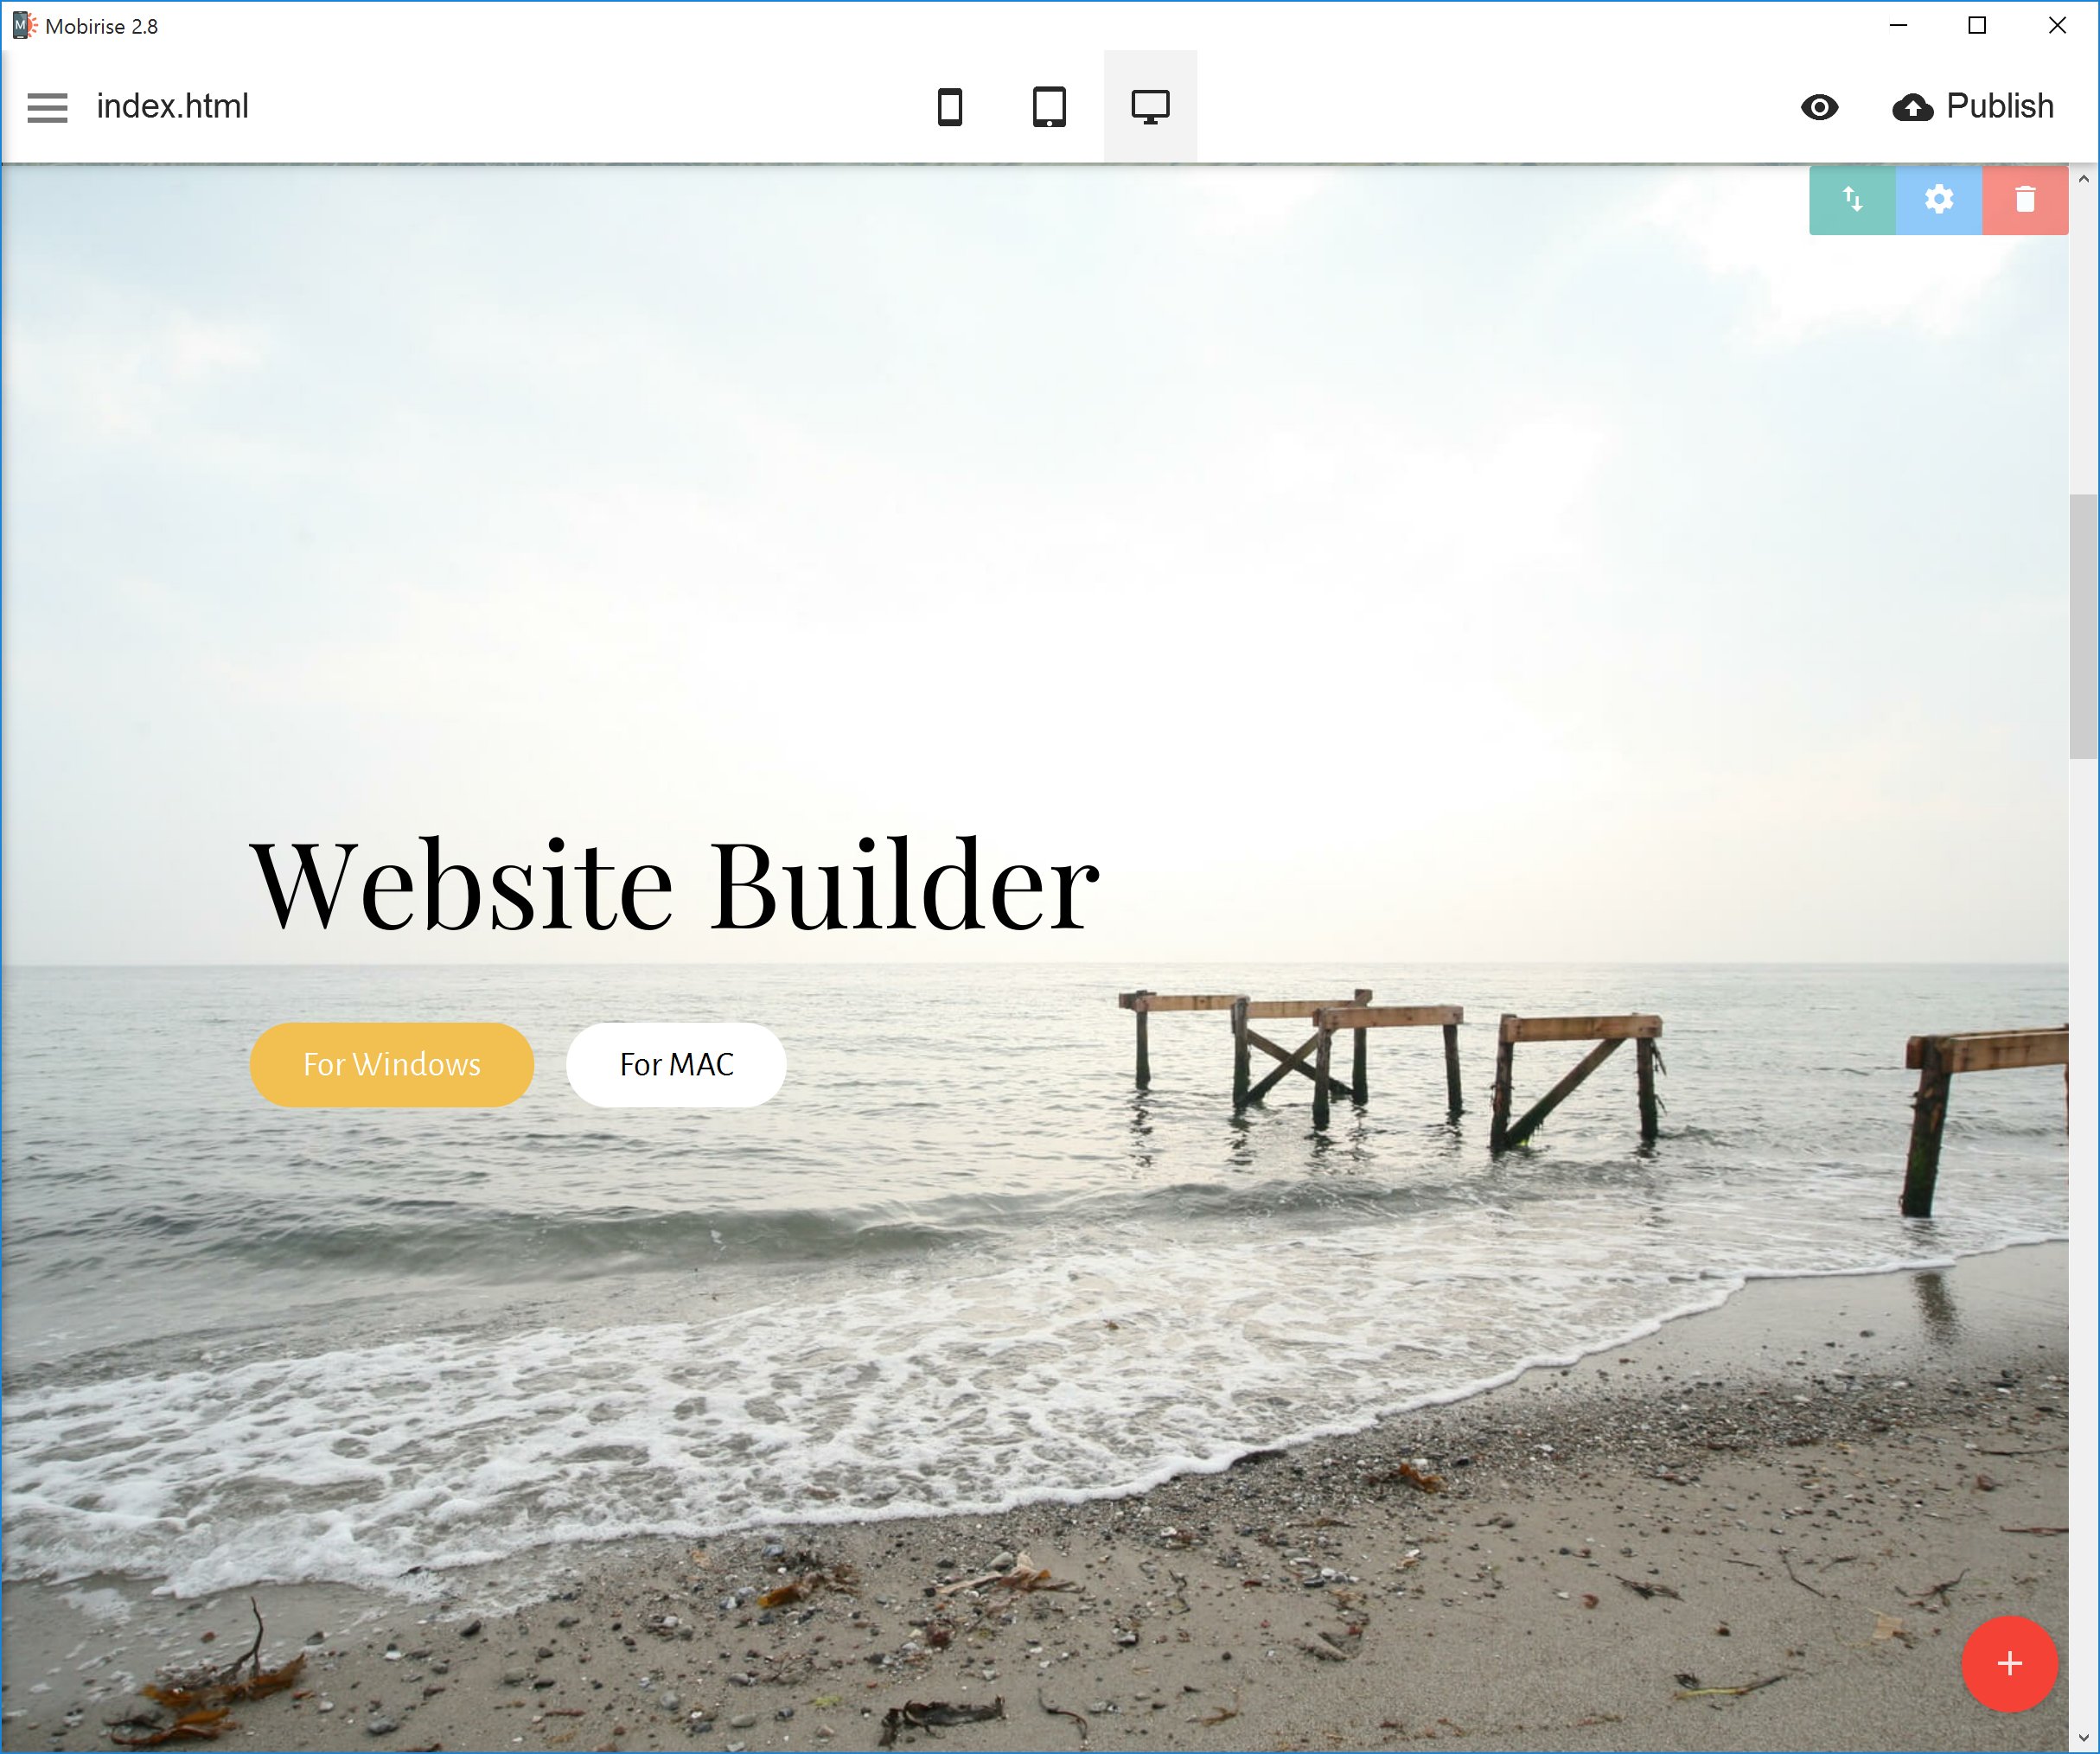 How to Build a Responsive Website in HTML5